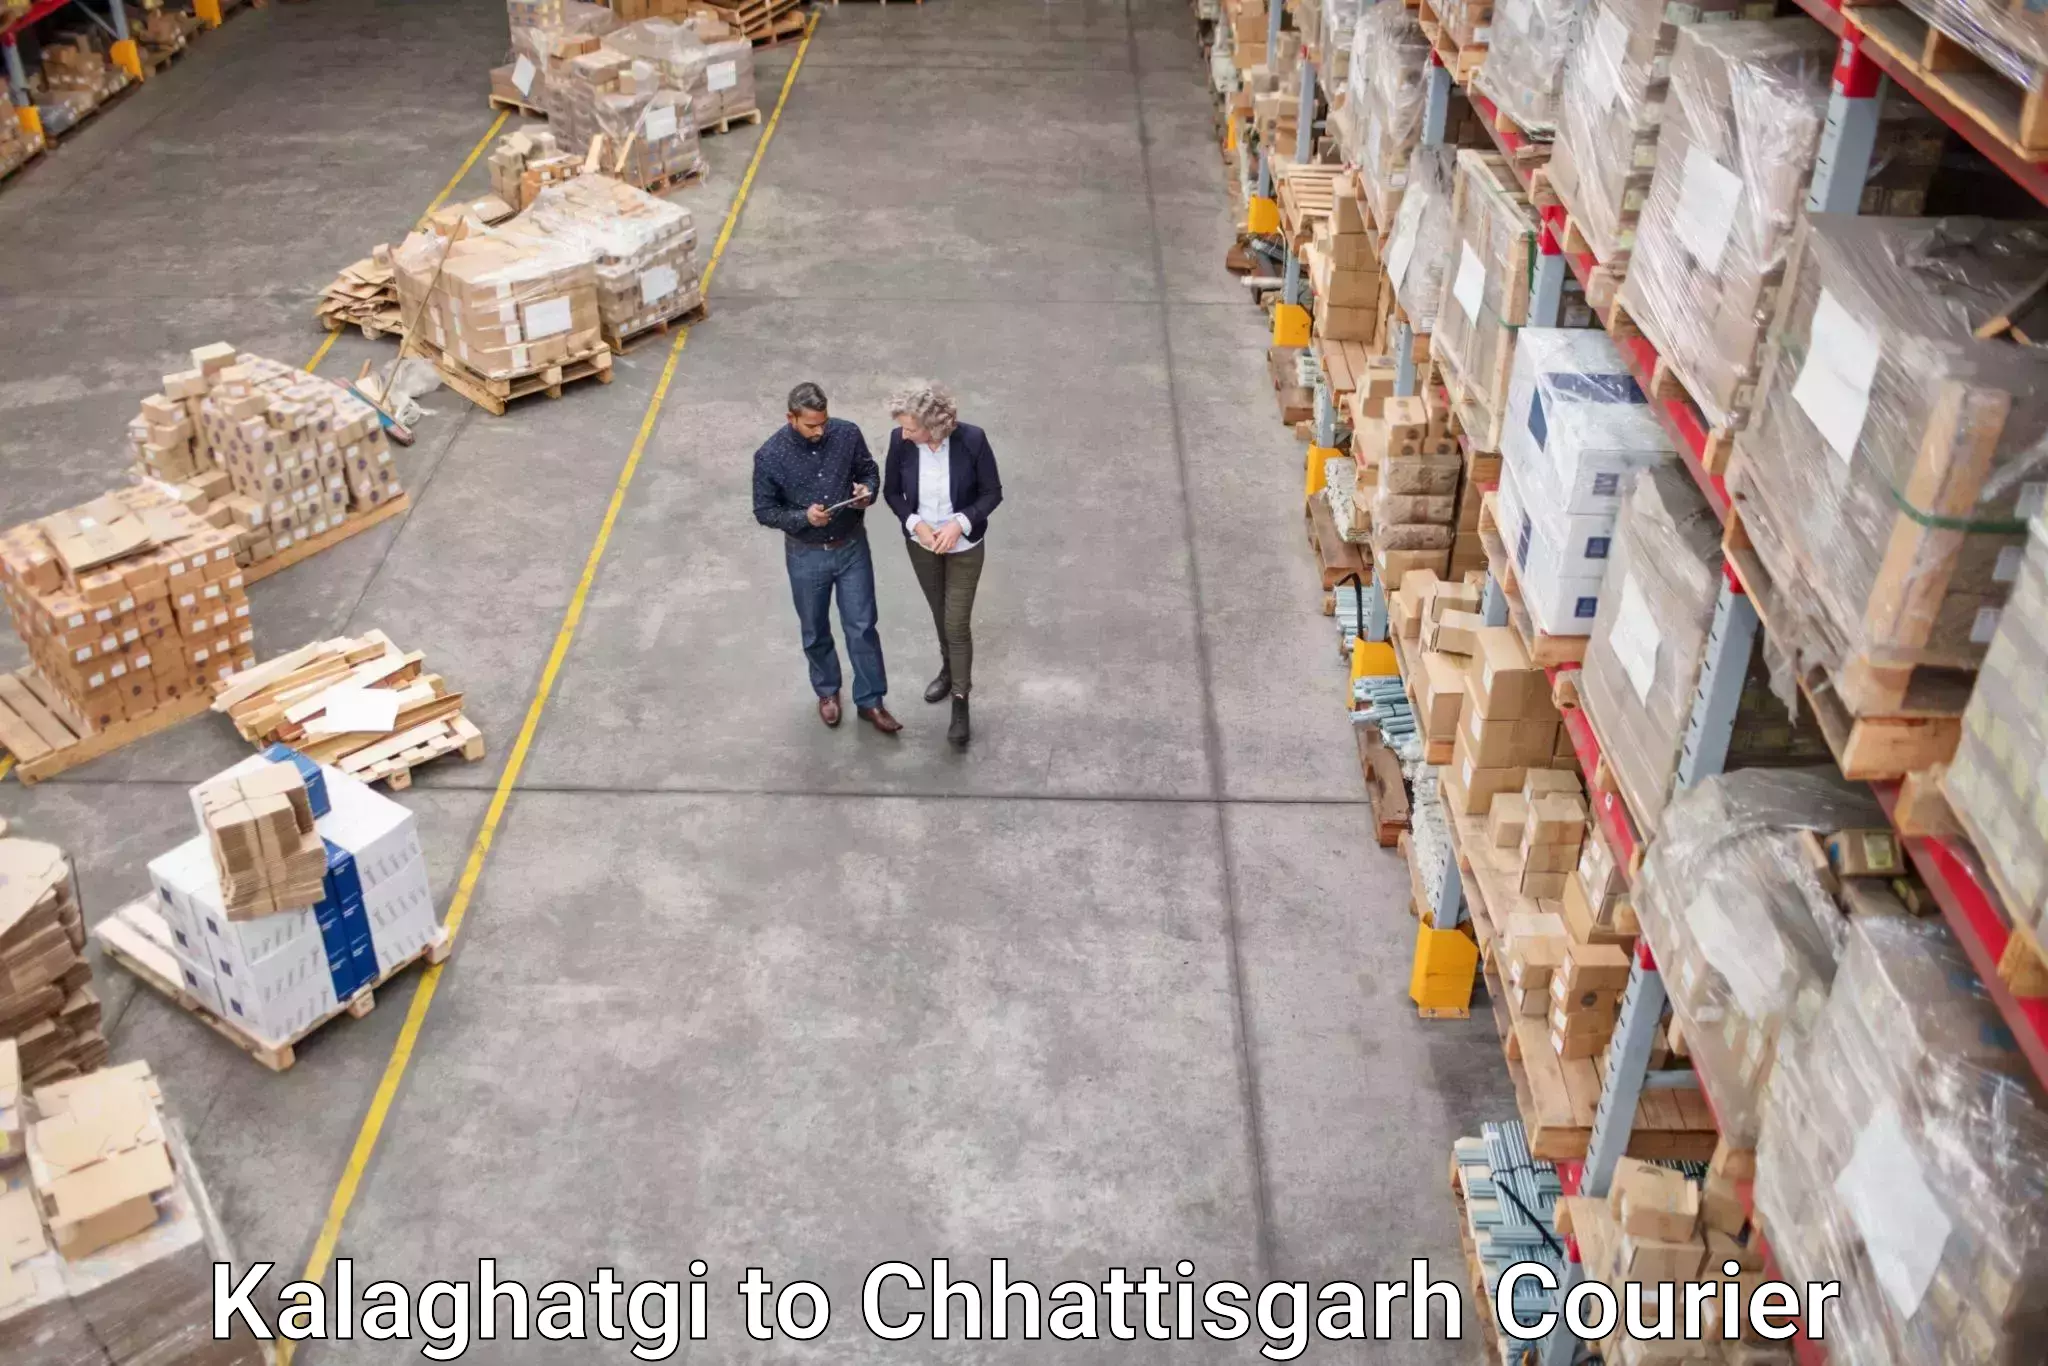 Cargo delivery service Kalaghatgi to Raigarh